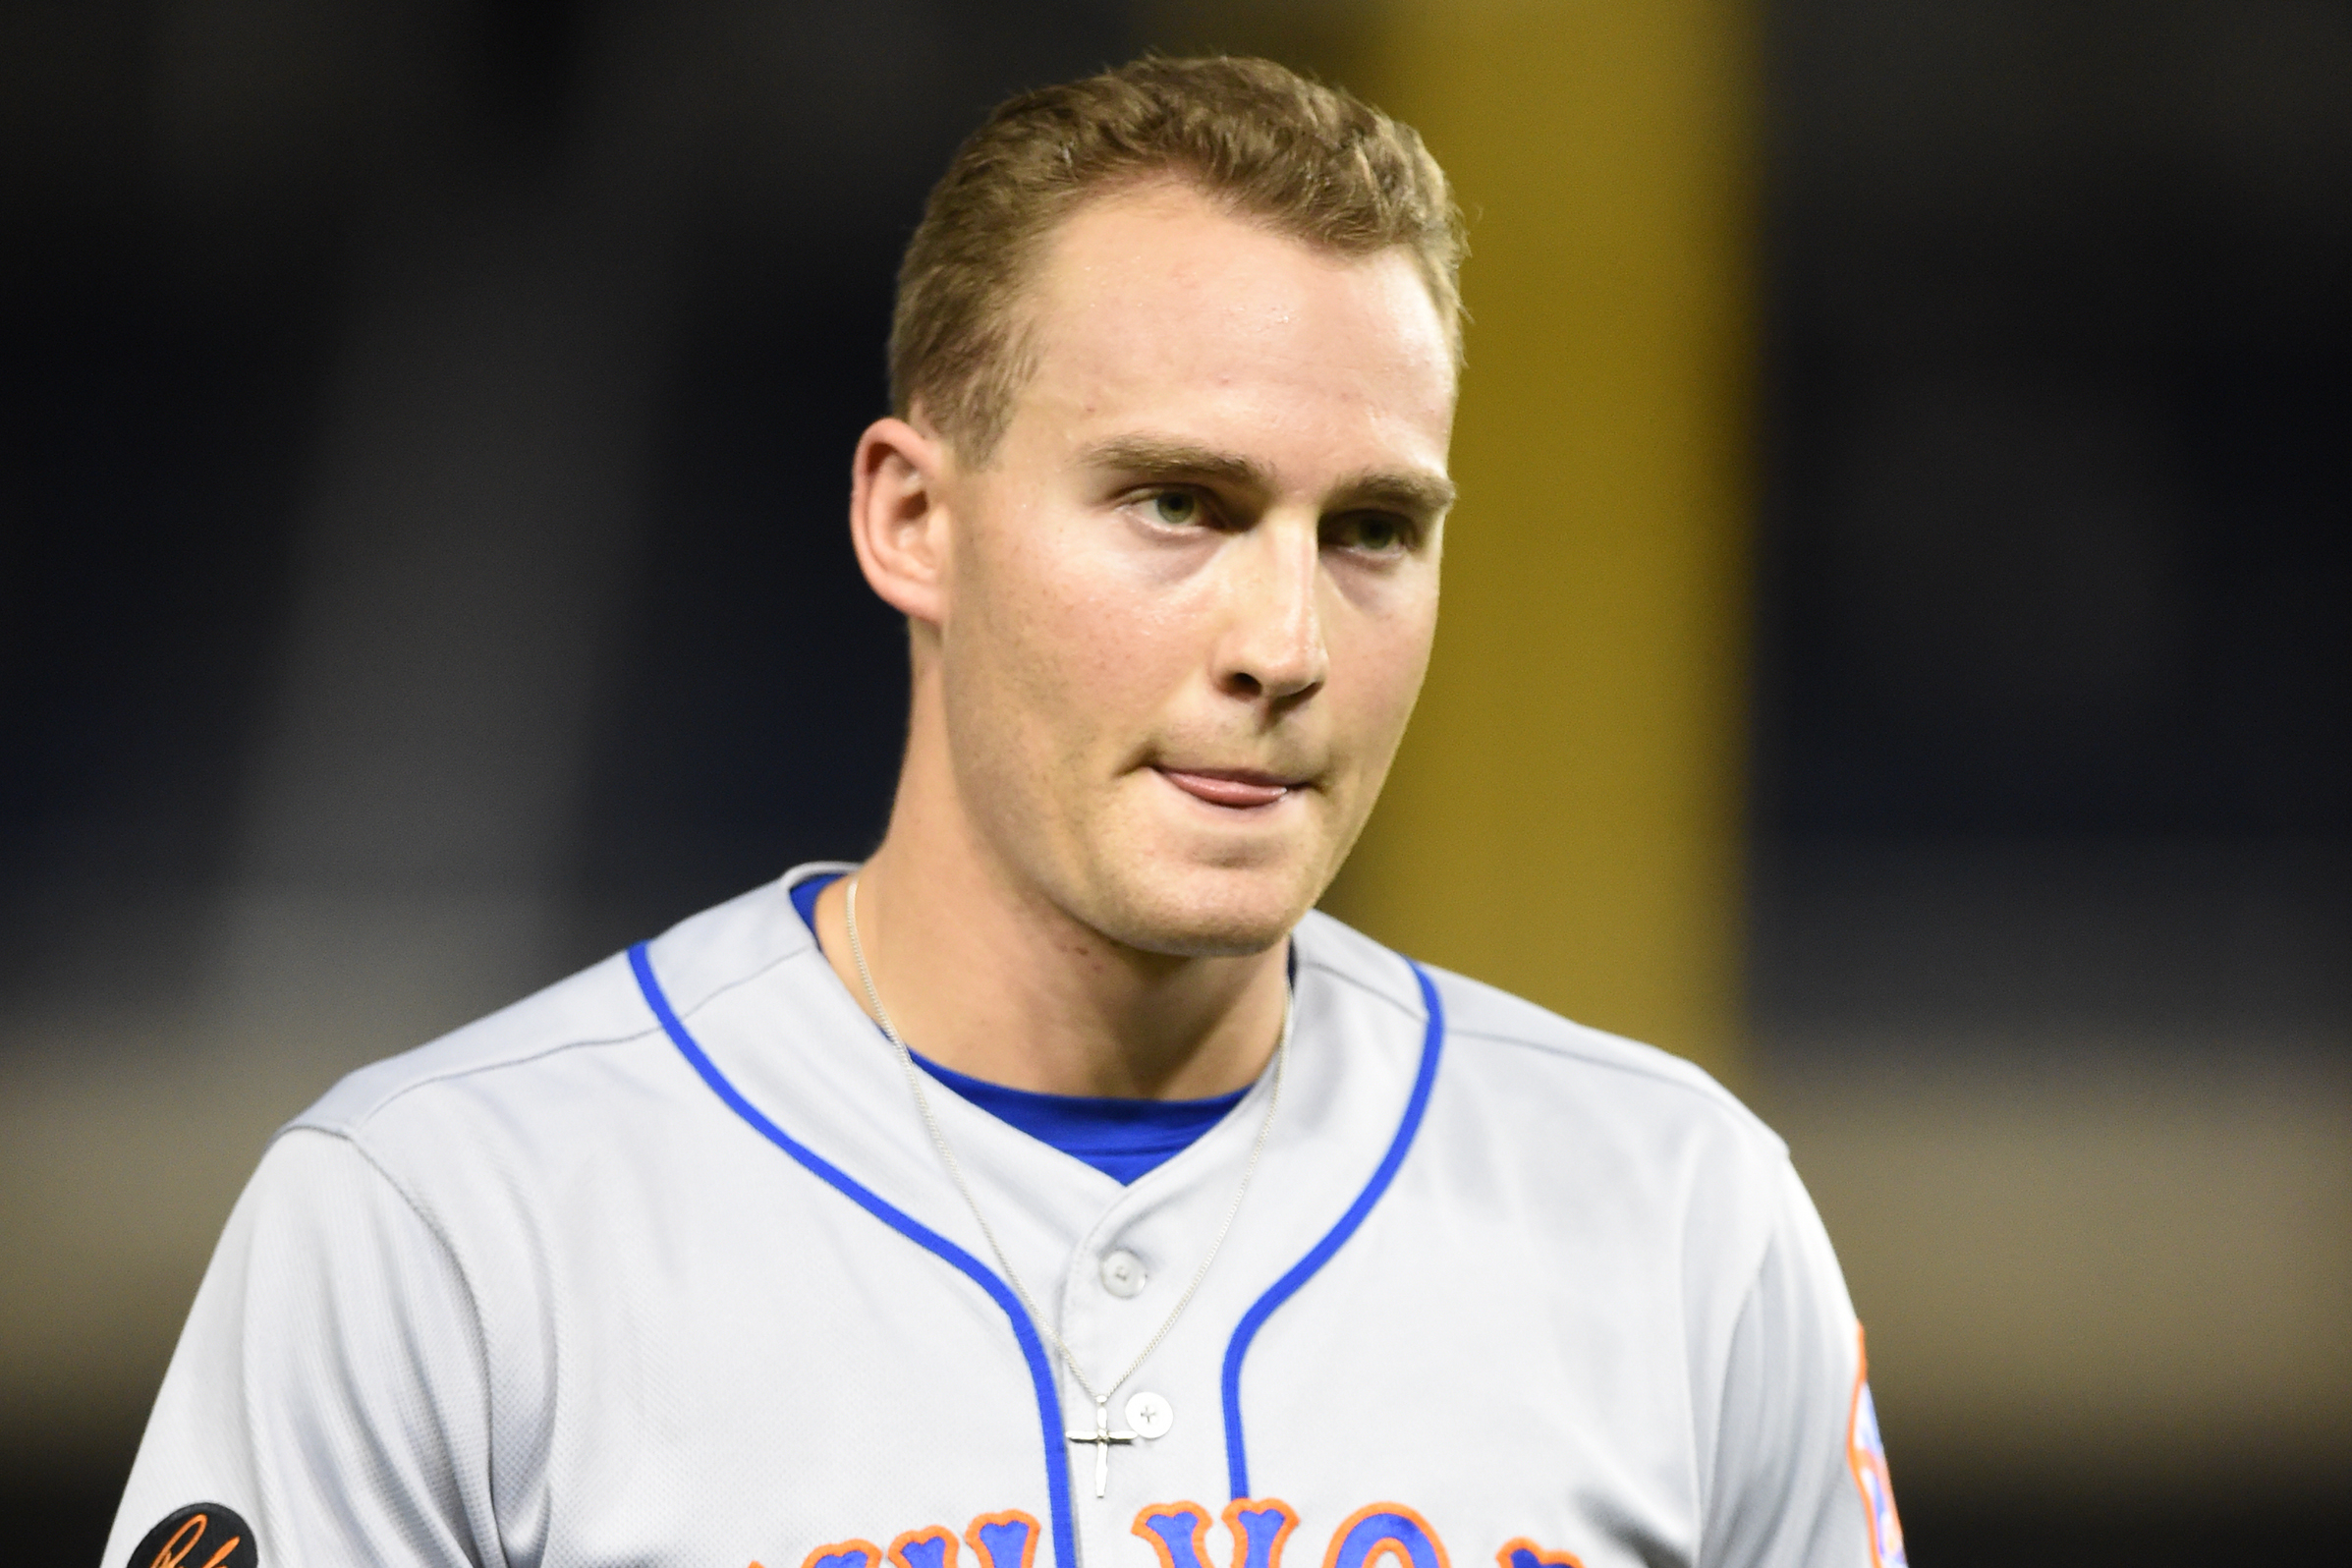 Brandon Nimmo on the chicken fiasco: 'I was not smiling during that